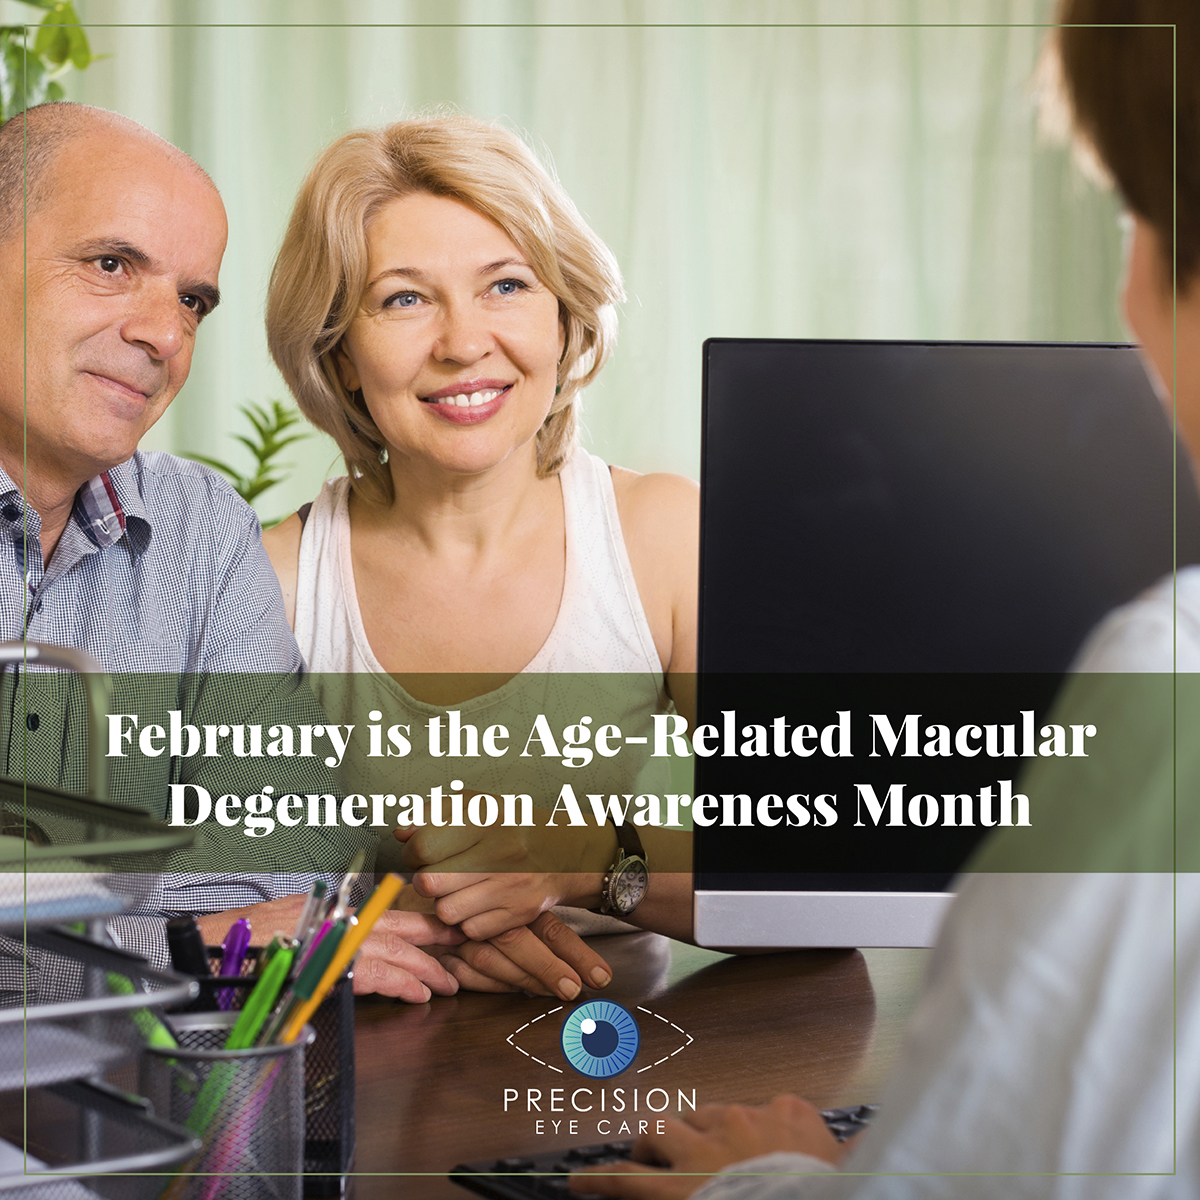 February is the Age-Related Macular Degeneration Awareness Month